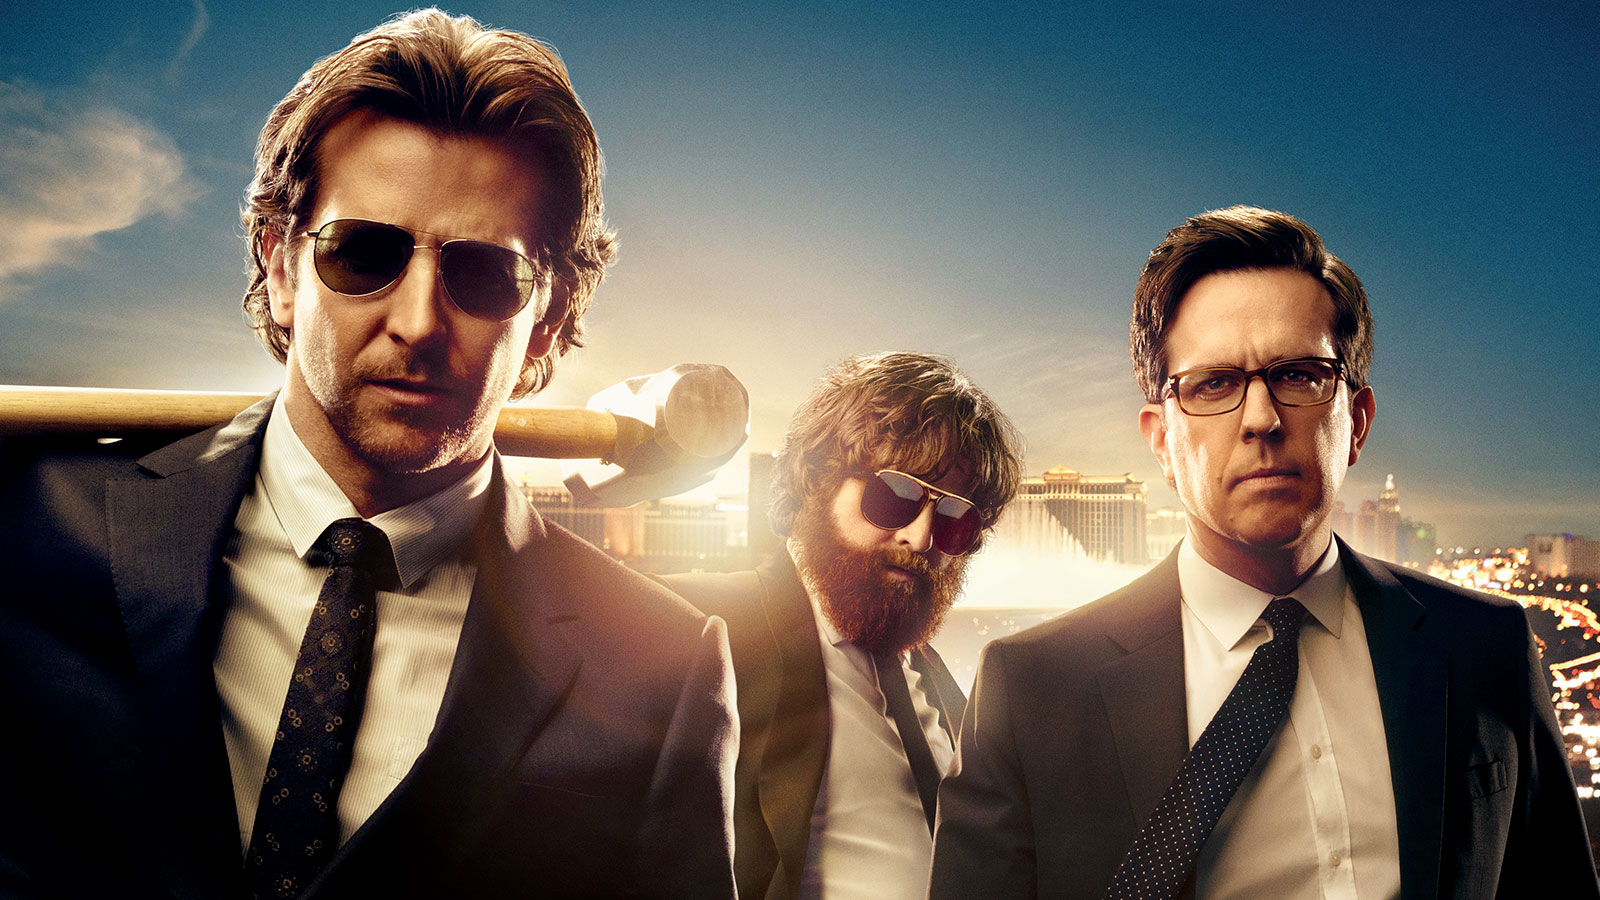 The Hangover Part III Backgrounds, Compatible - PC, Mobile, Gadgets| 1600x900 px